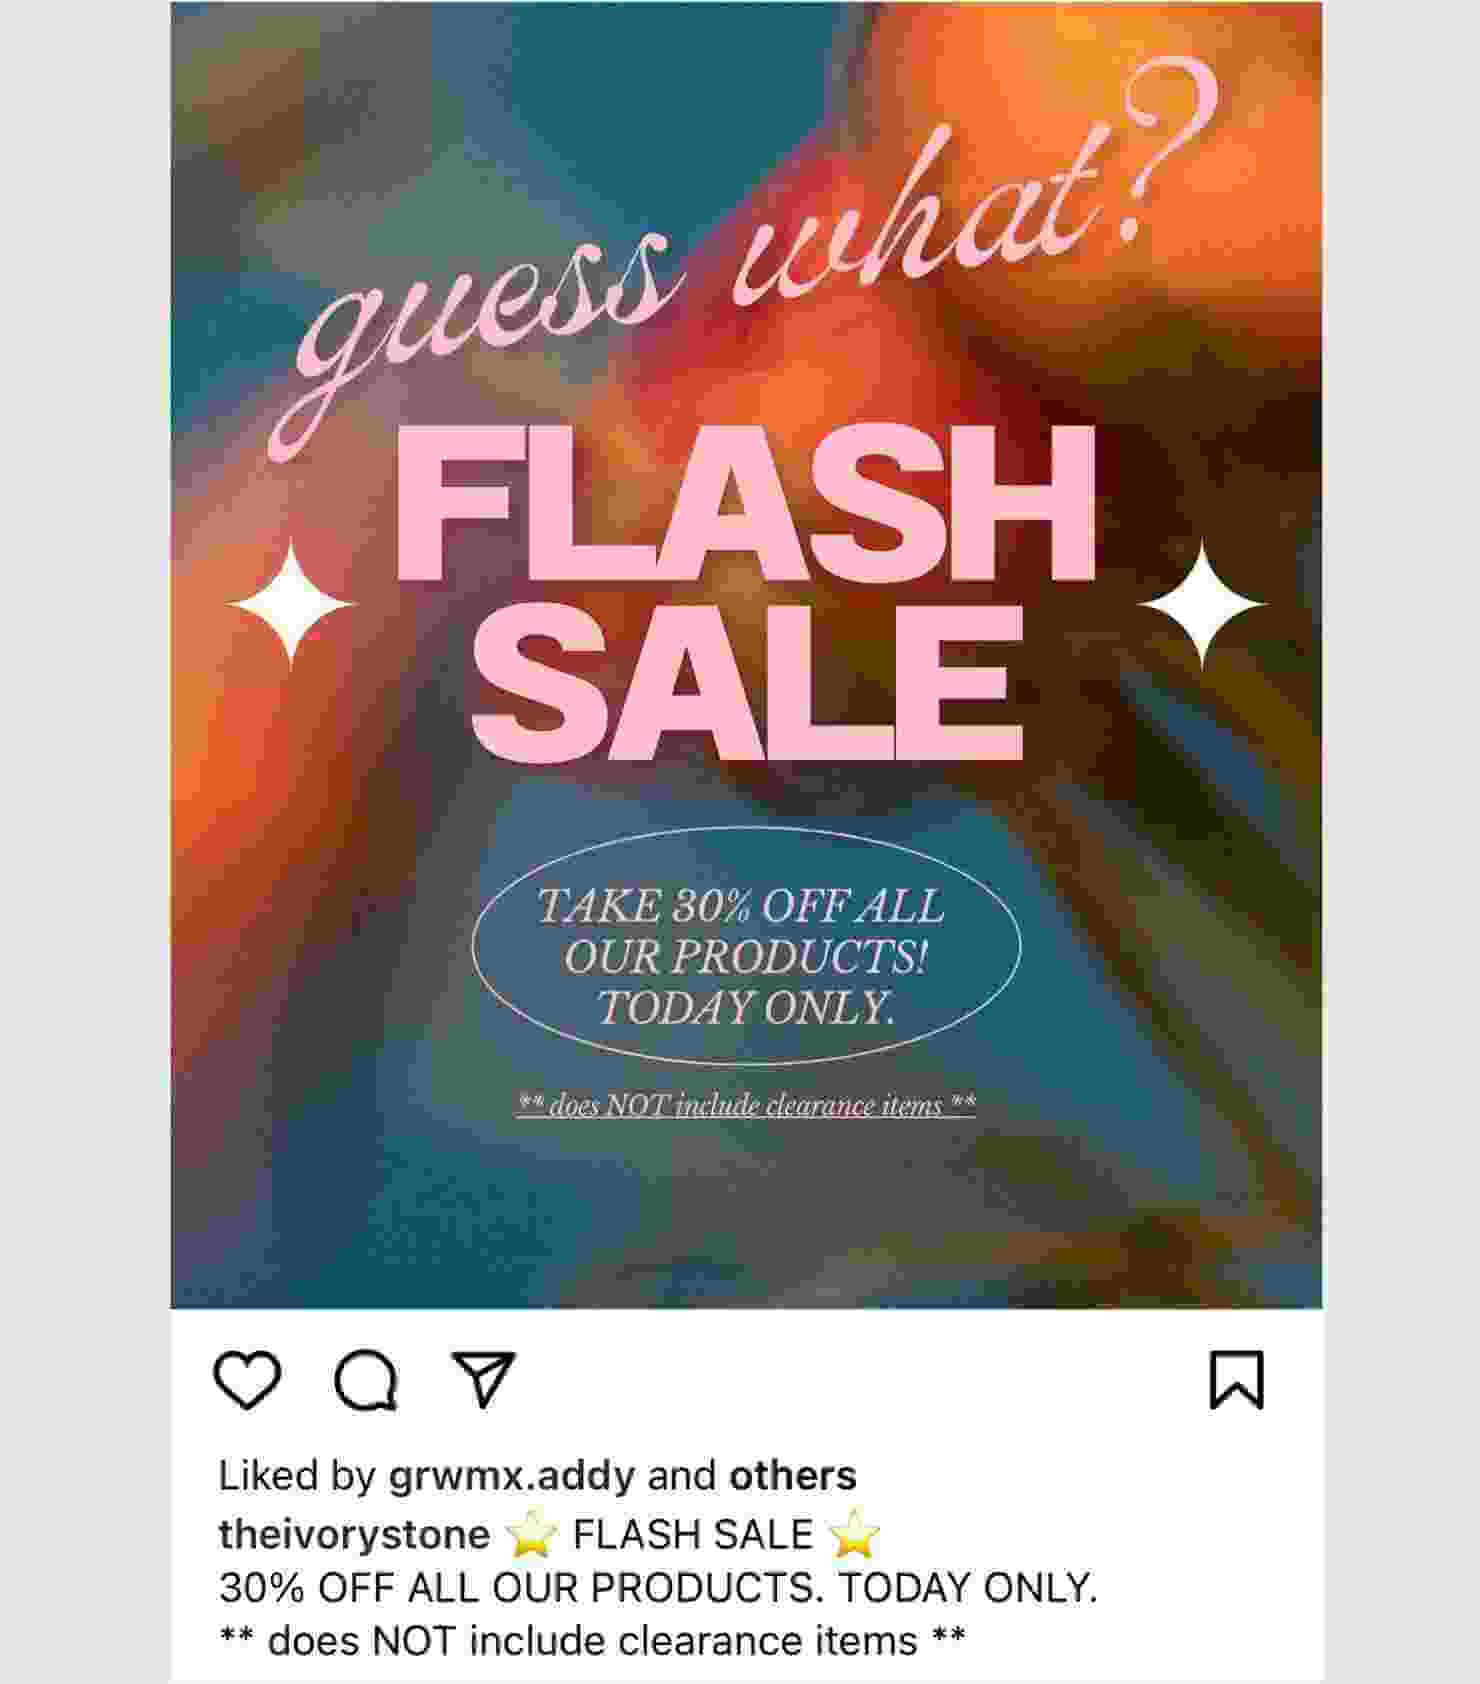 Instagram post from @theivorystone. The image is colorful and says "guess shat? FLASH SALE. Take 30% off all our products! Today Only. **does NOT include clearance items**